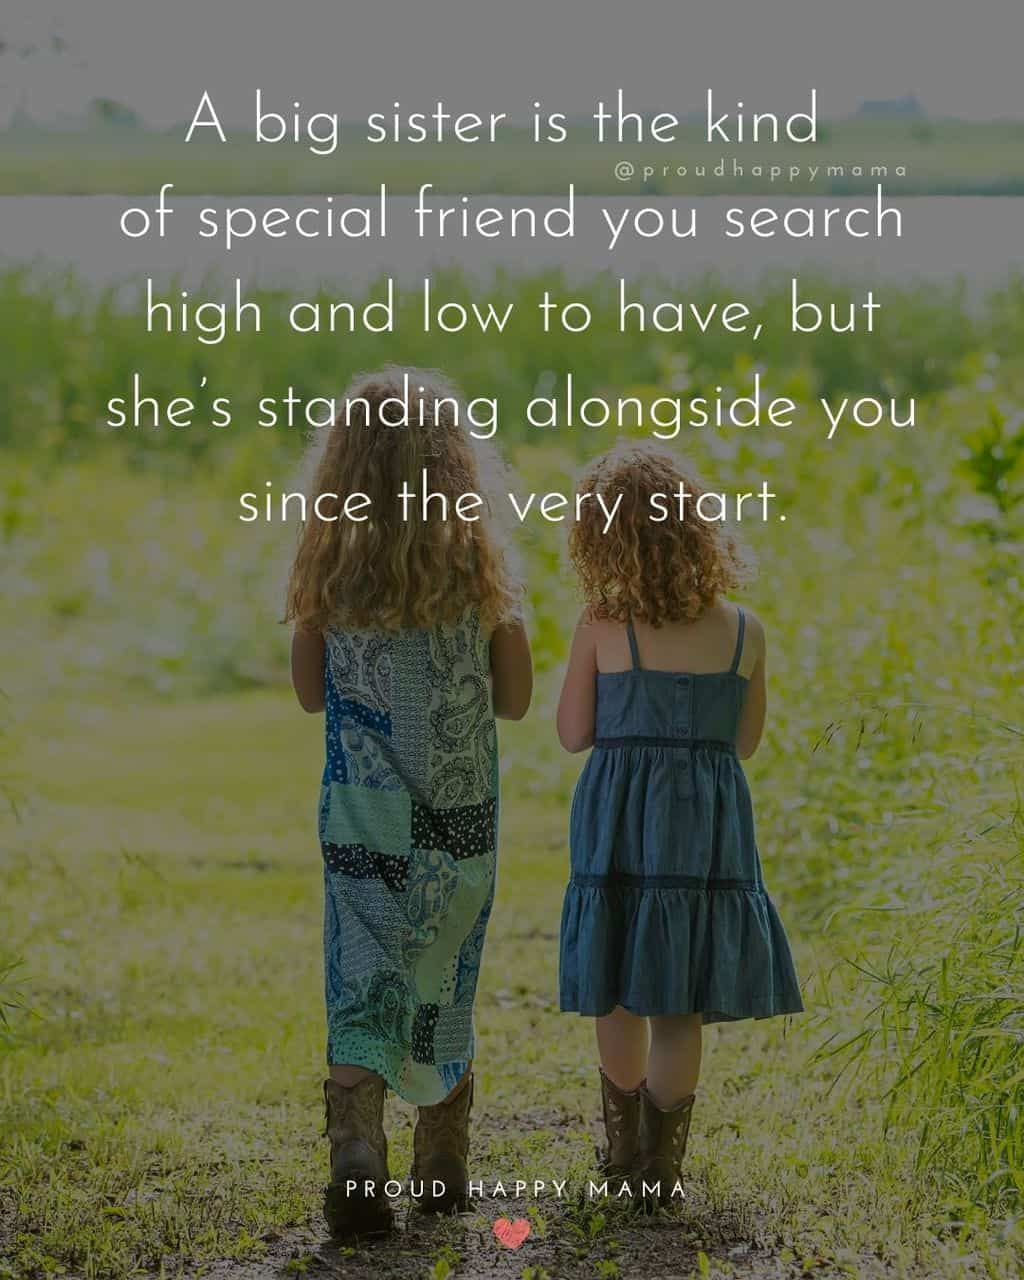 50 Best Big Sister Quotes And Sayings [with Images]